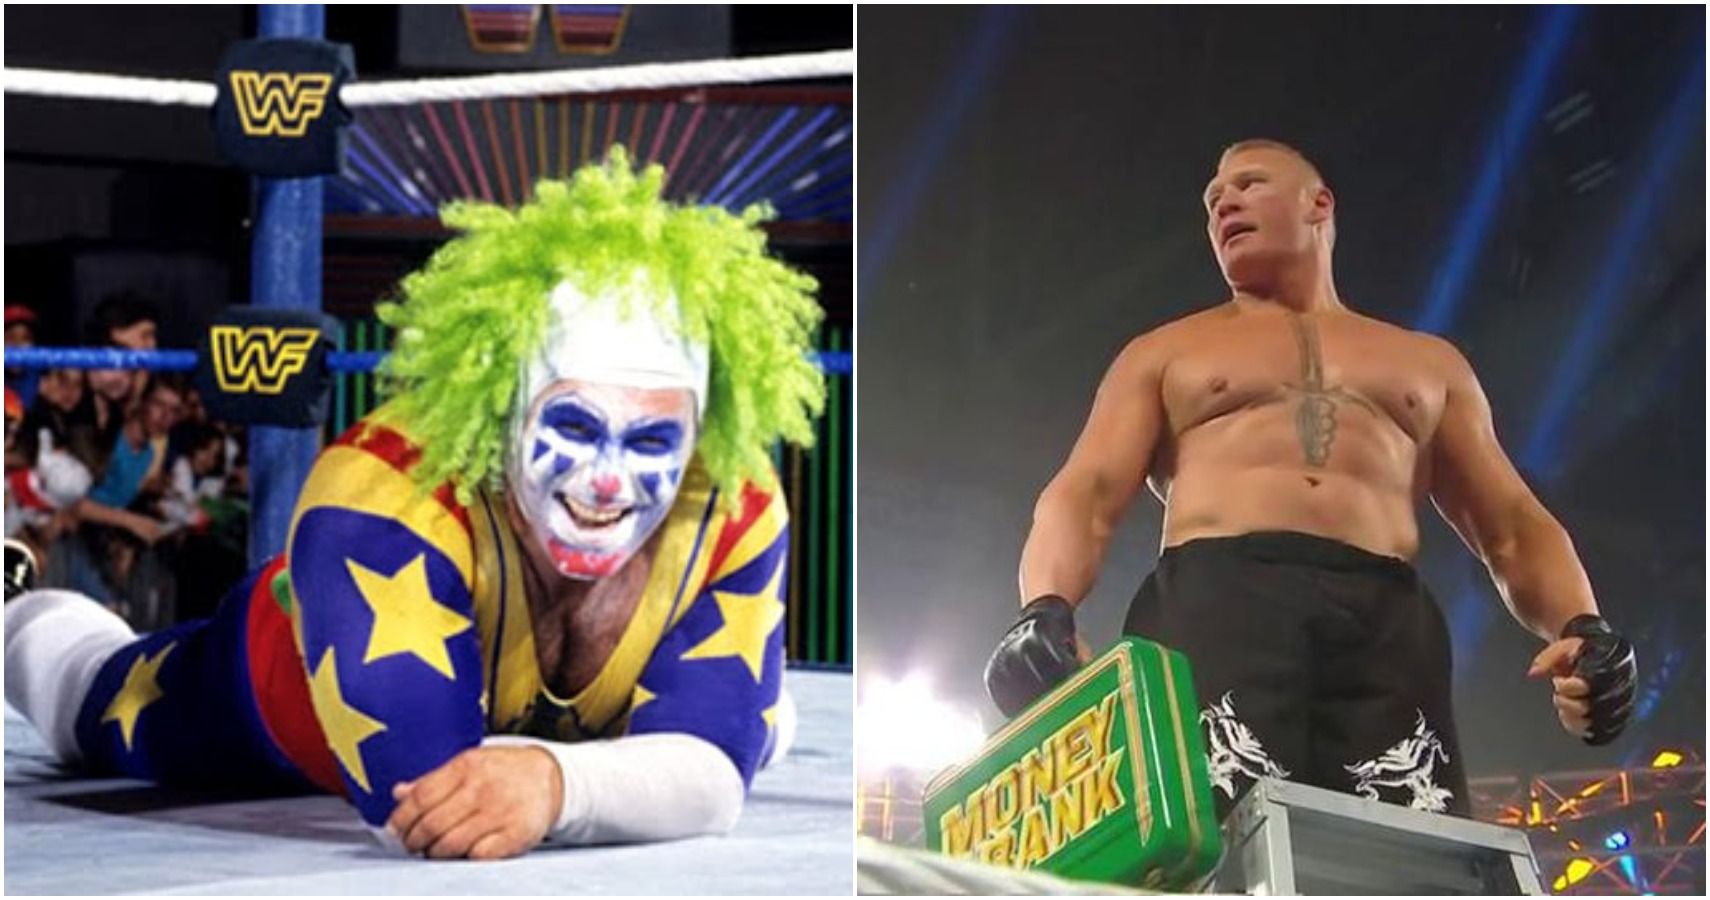 Doink the clown and Brock Lesnar with MITB briefcase